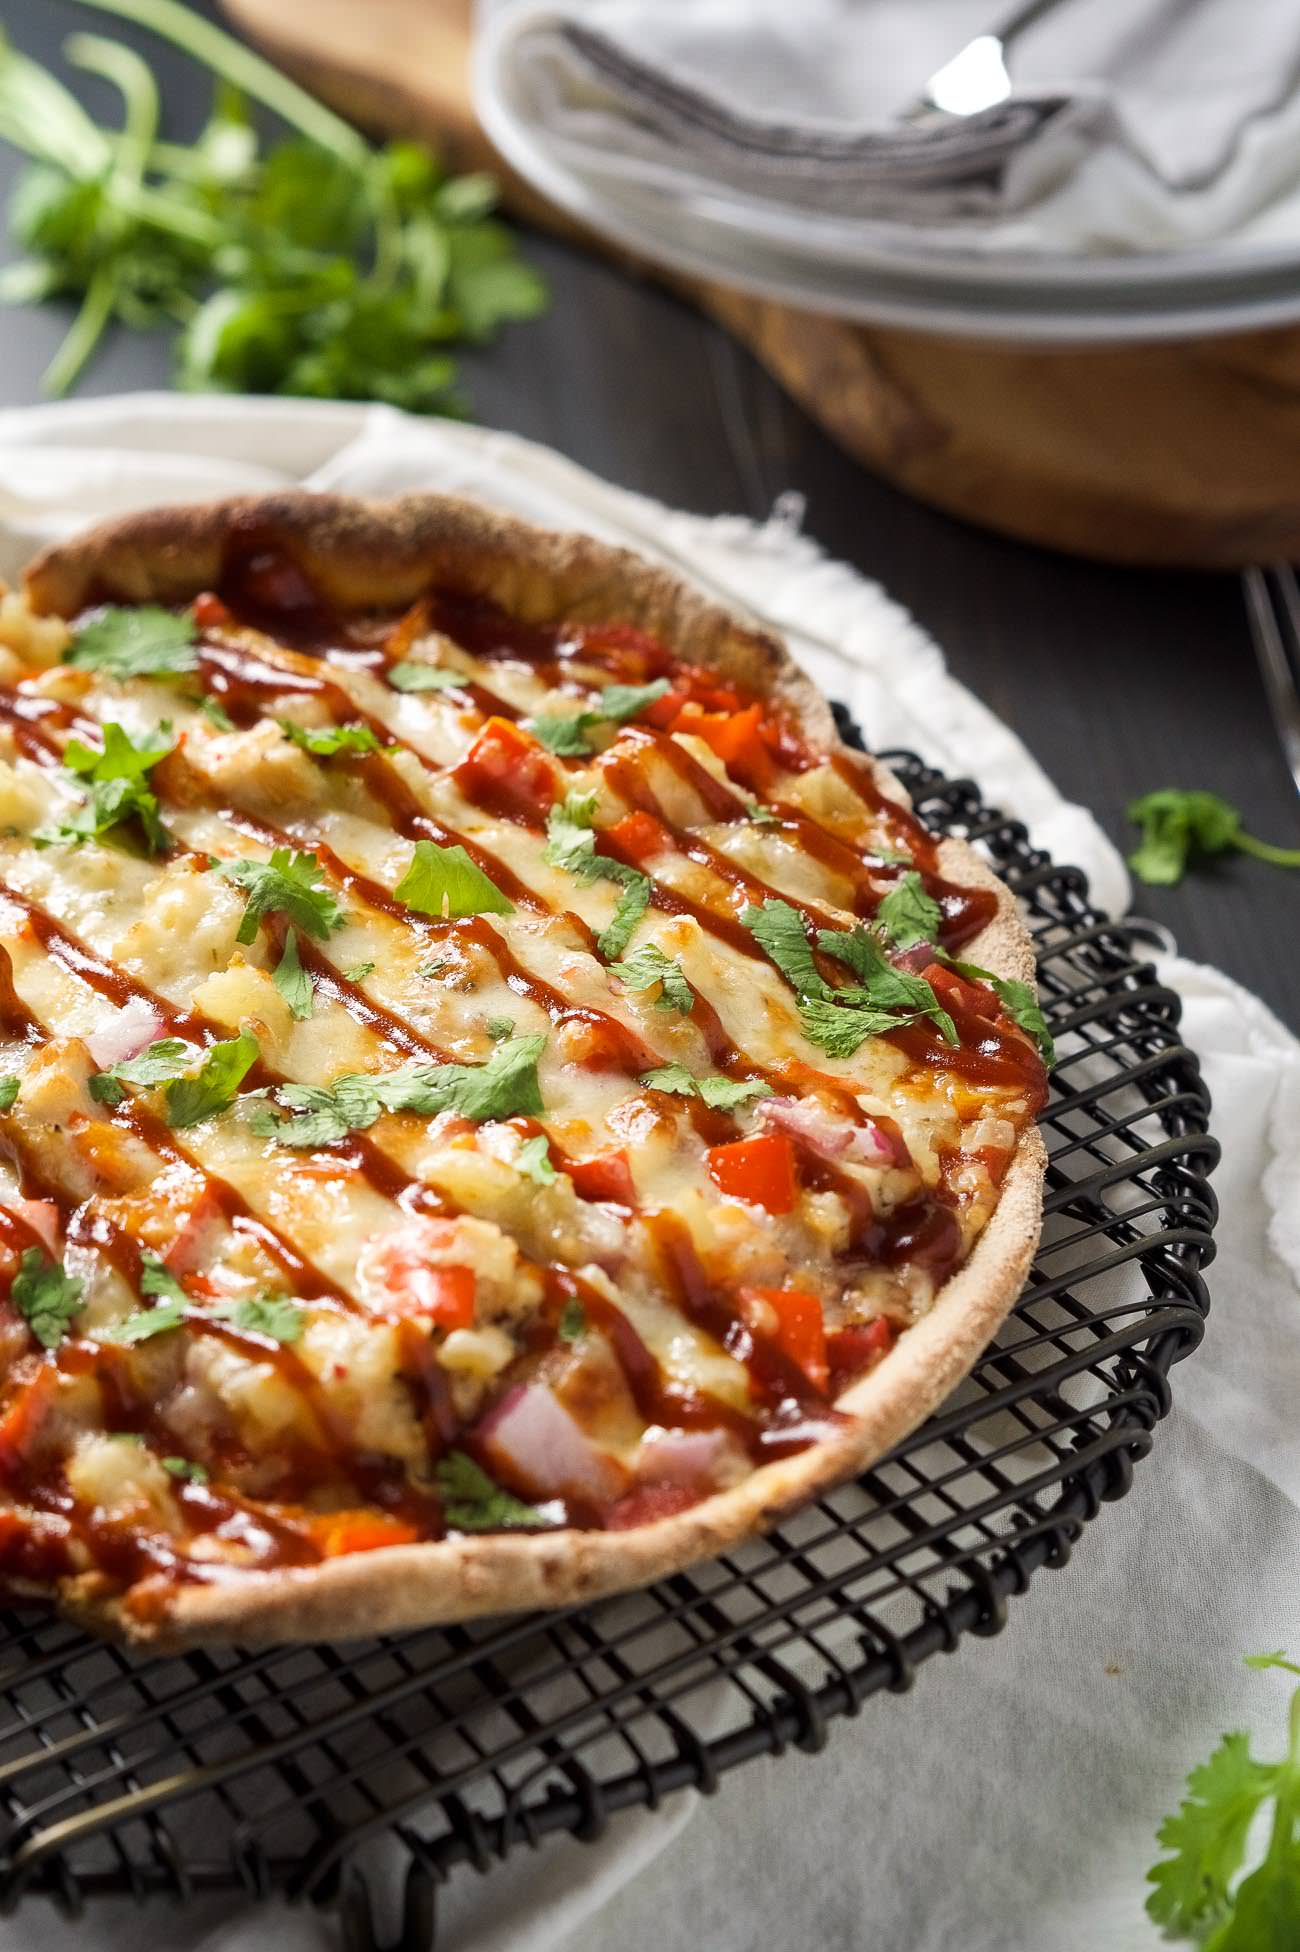 This pizza has two things going for it: sweet and spicy pizza done in one pan. Uno pan. And second, it's cooked in a skillet! The result? One speedy dinner that is crazy good. One point for Megan.